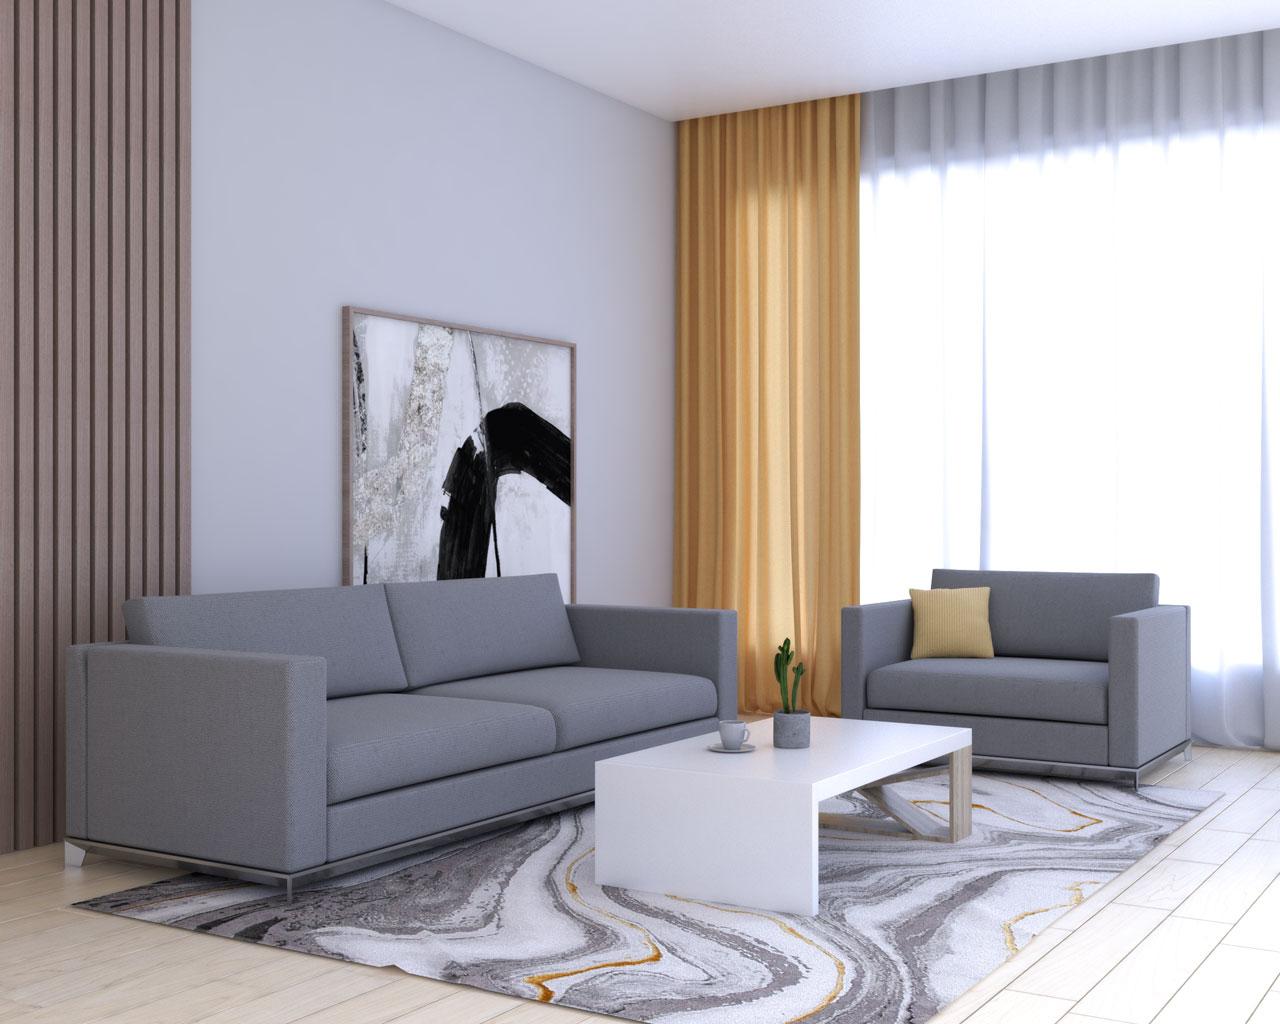 Yellow curtains with gray furniture